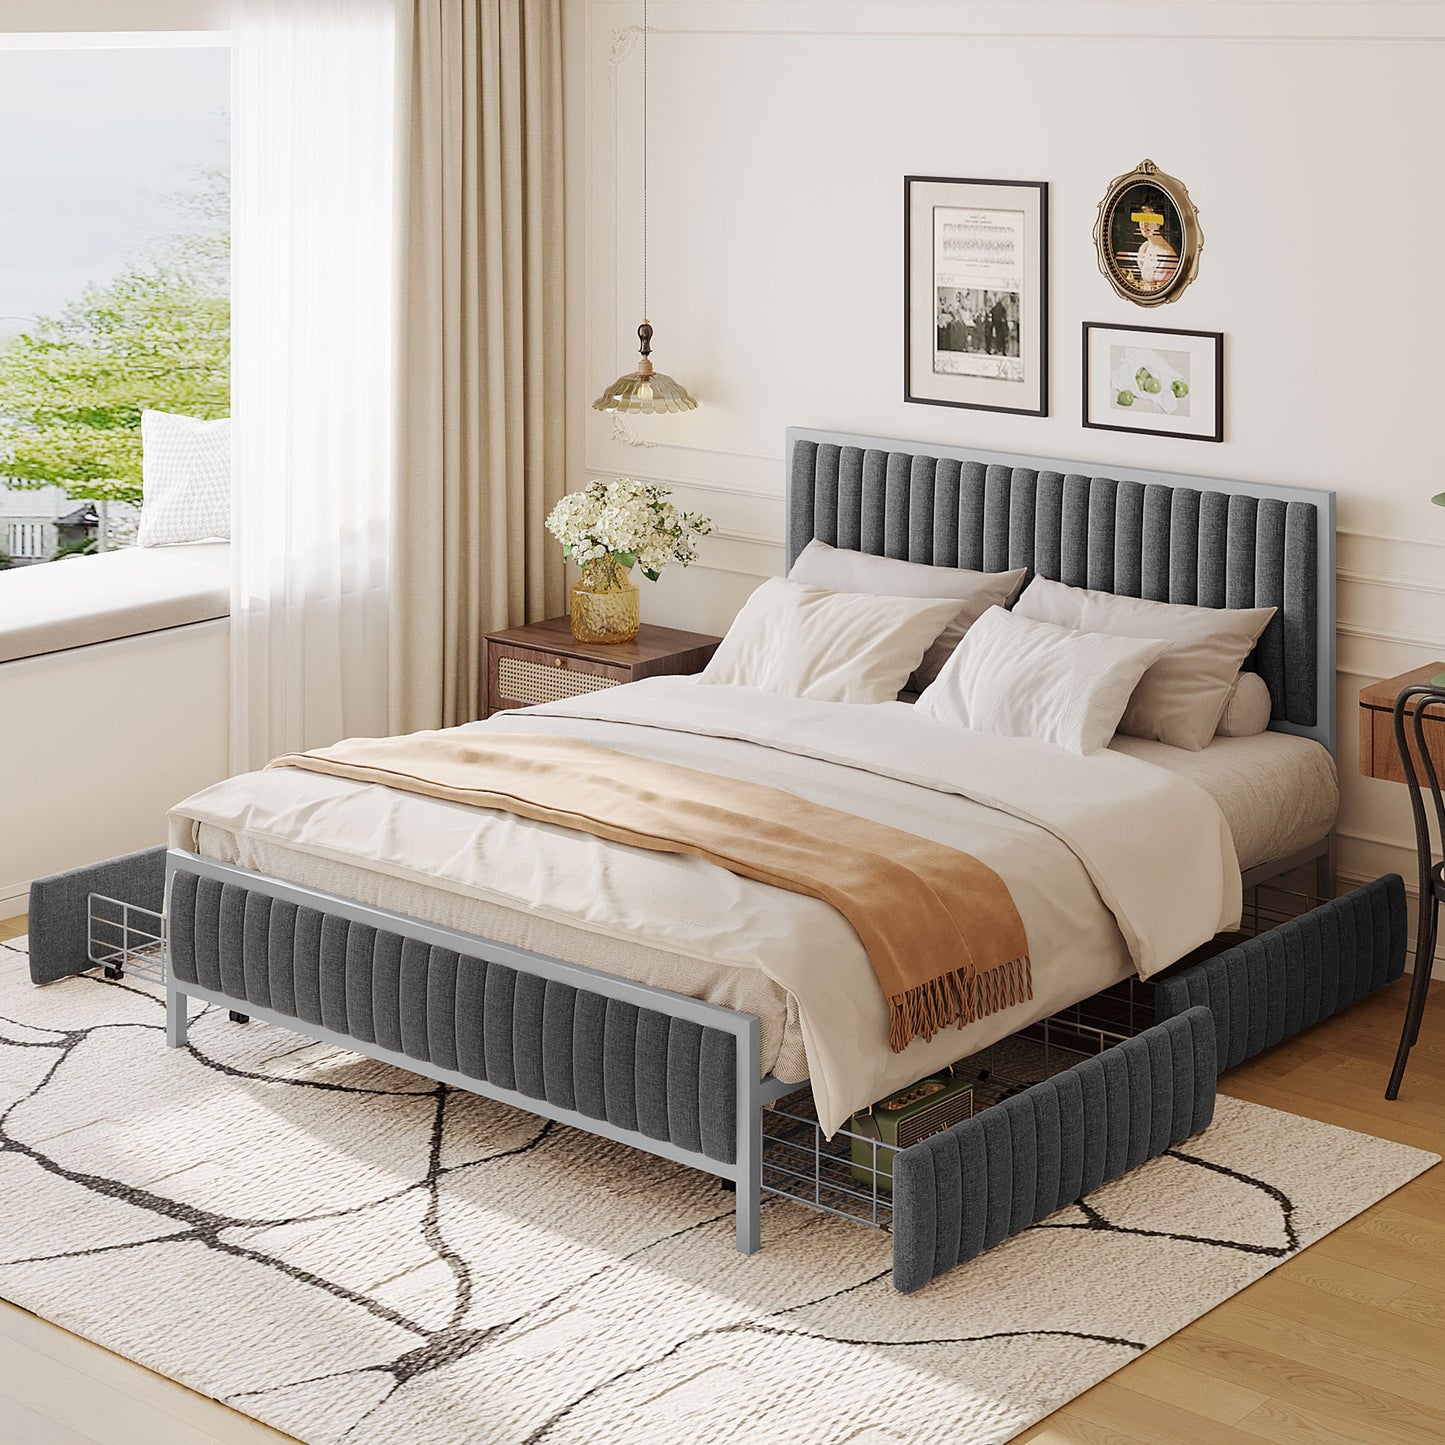 Queen Size Upholstered Platform Bed with 4 Drawers, Linen Fabric, Gray